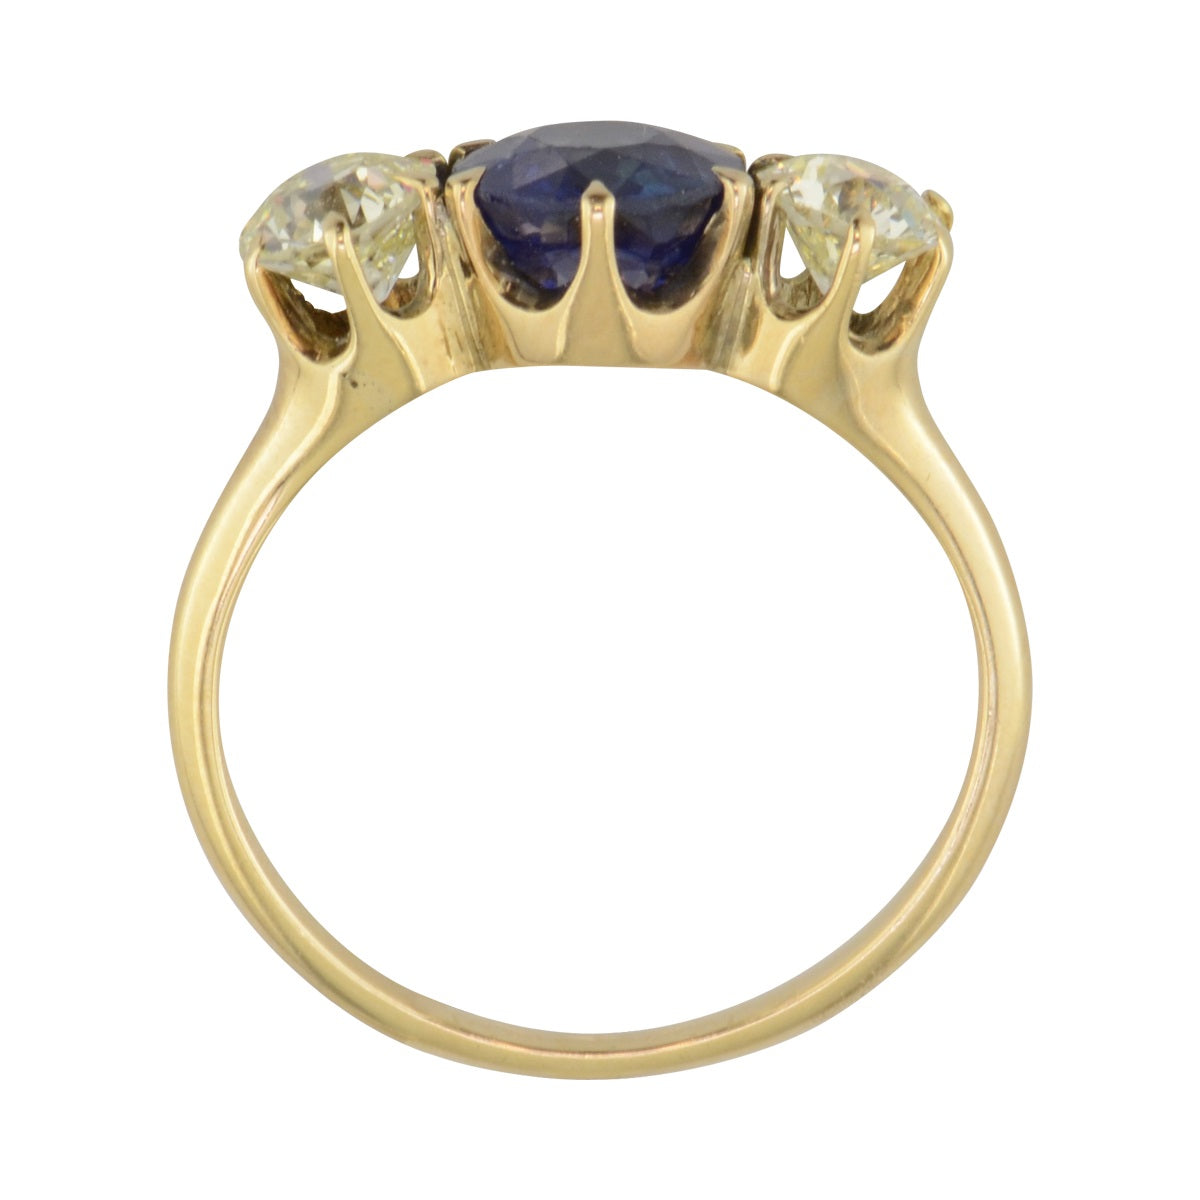 Tryon Creek Antique three stone engagement ring with sapphire and diamond.